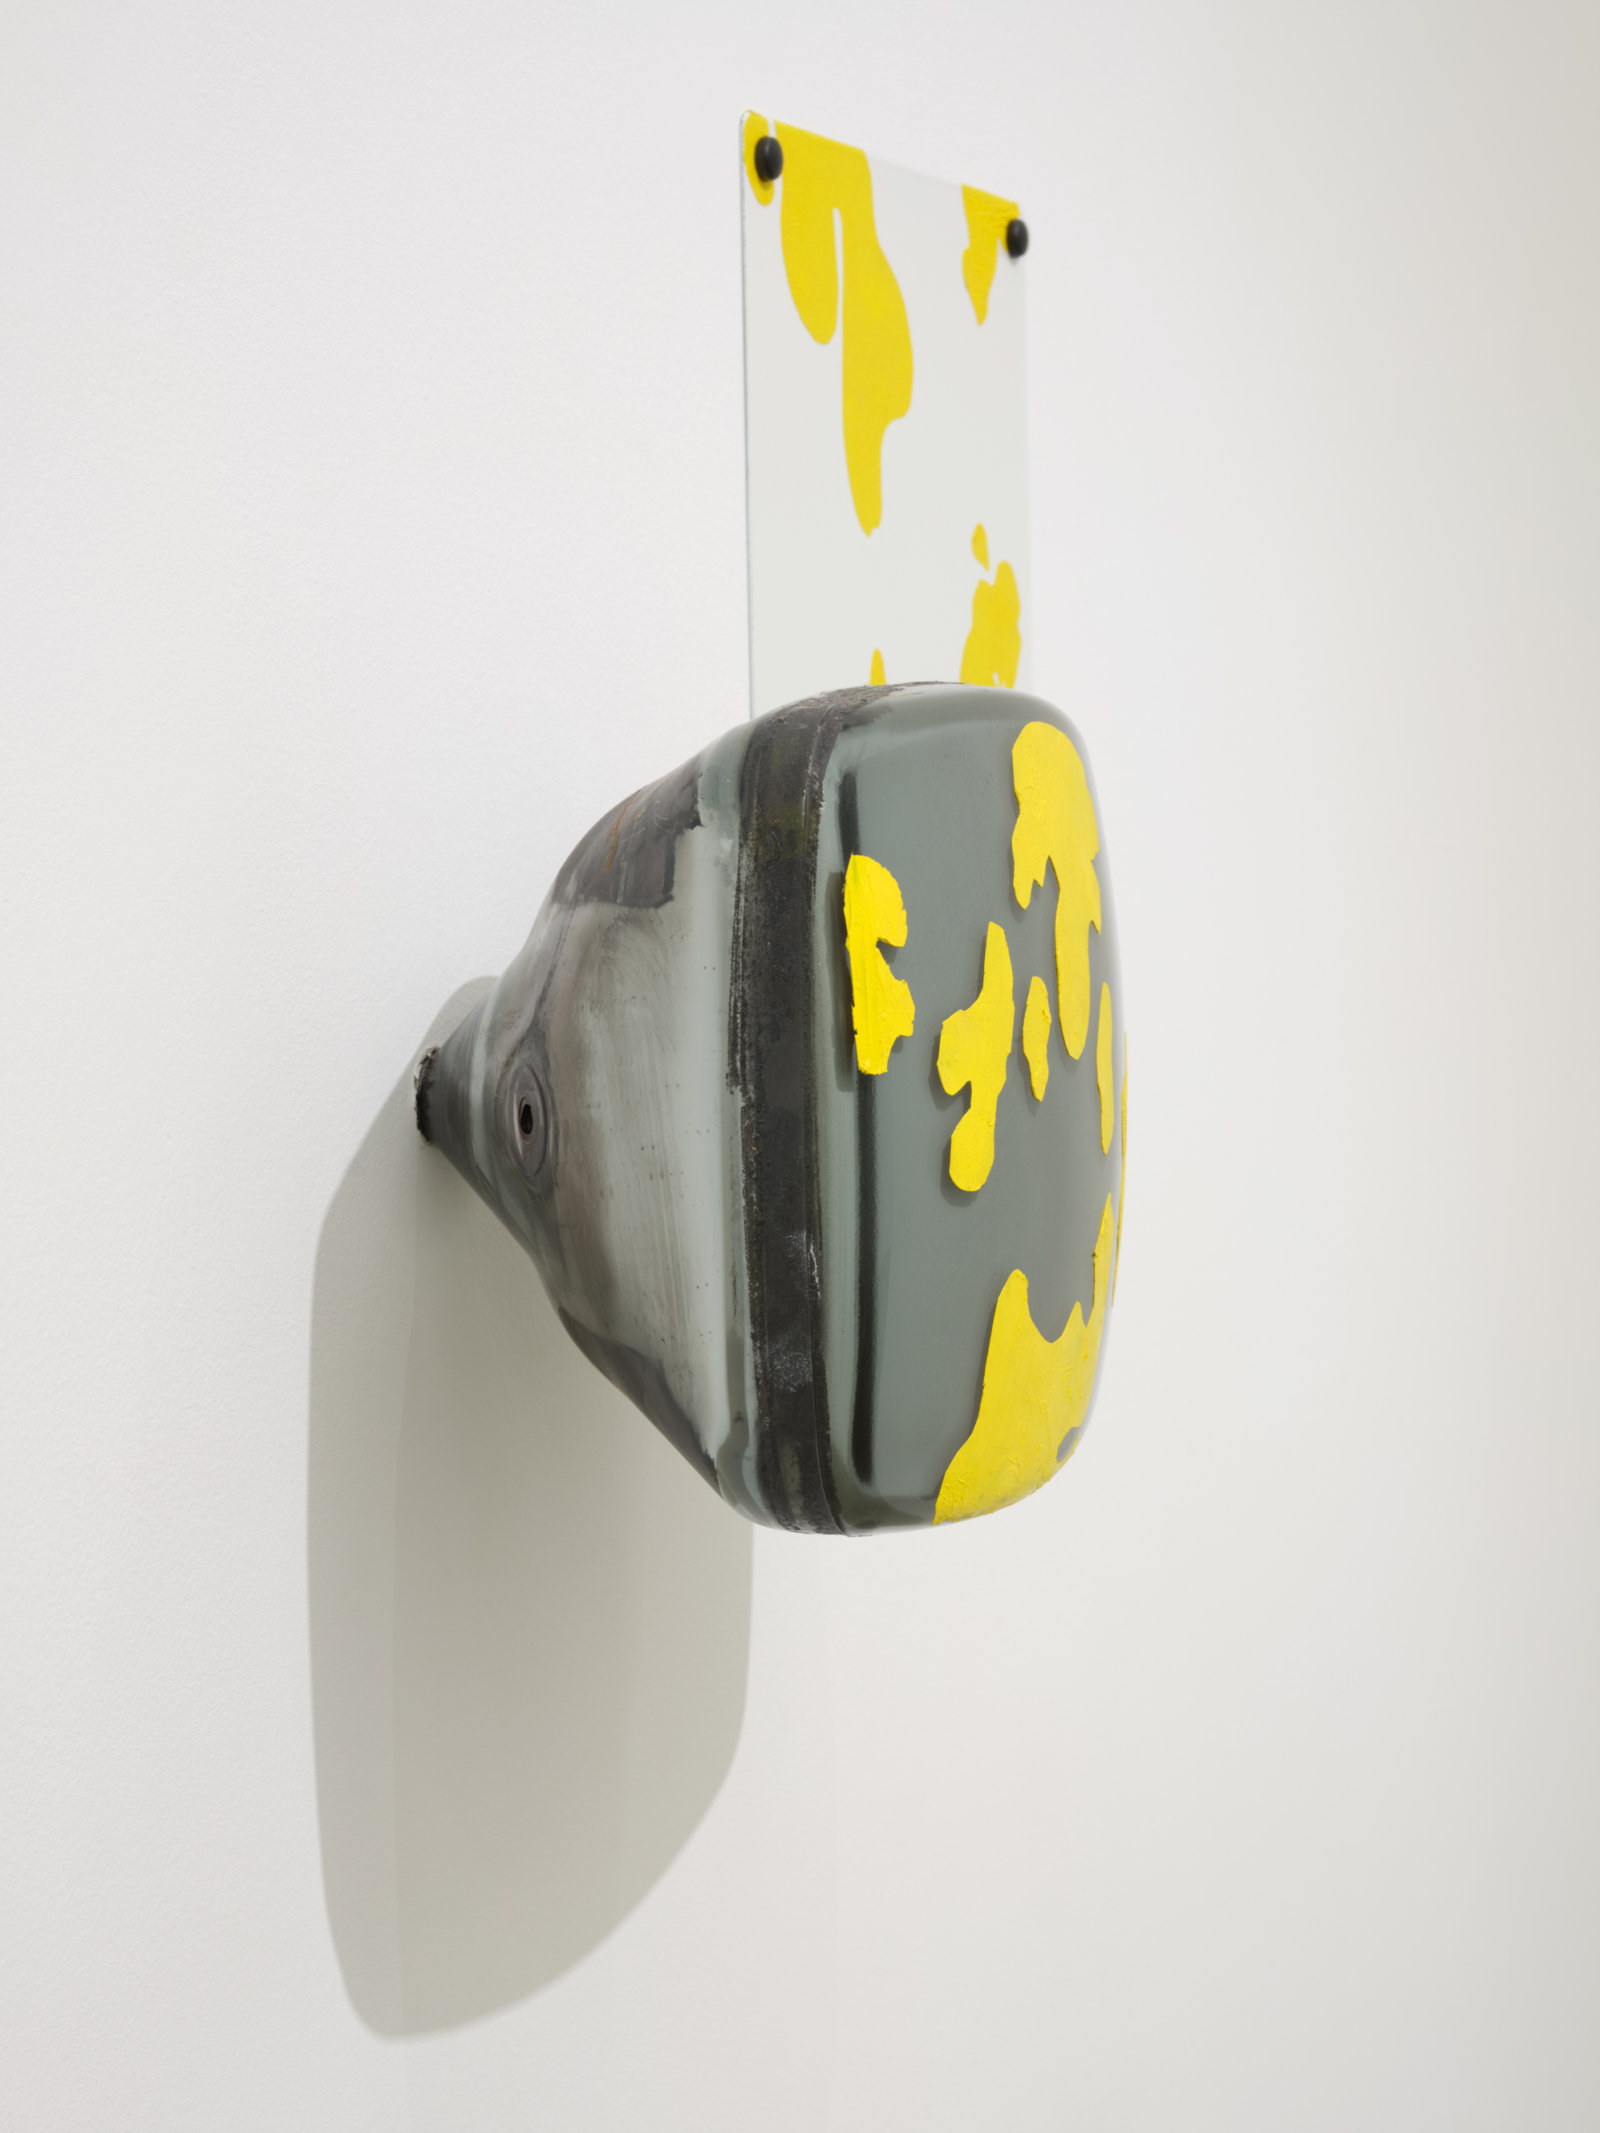 Jerry Pethick, Through the Trees (Walnut) (detail), 1994–1995, enamelled steel, silicone, TV tube, aluminum, steel nails, 18 x 27 x 28 in. (46 x 69 x 71 cm)